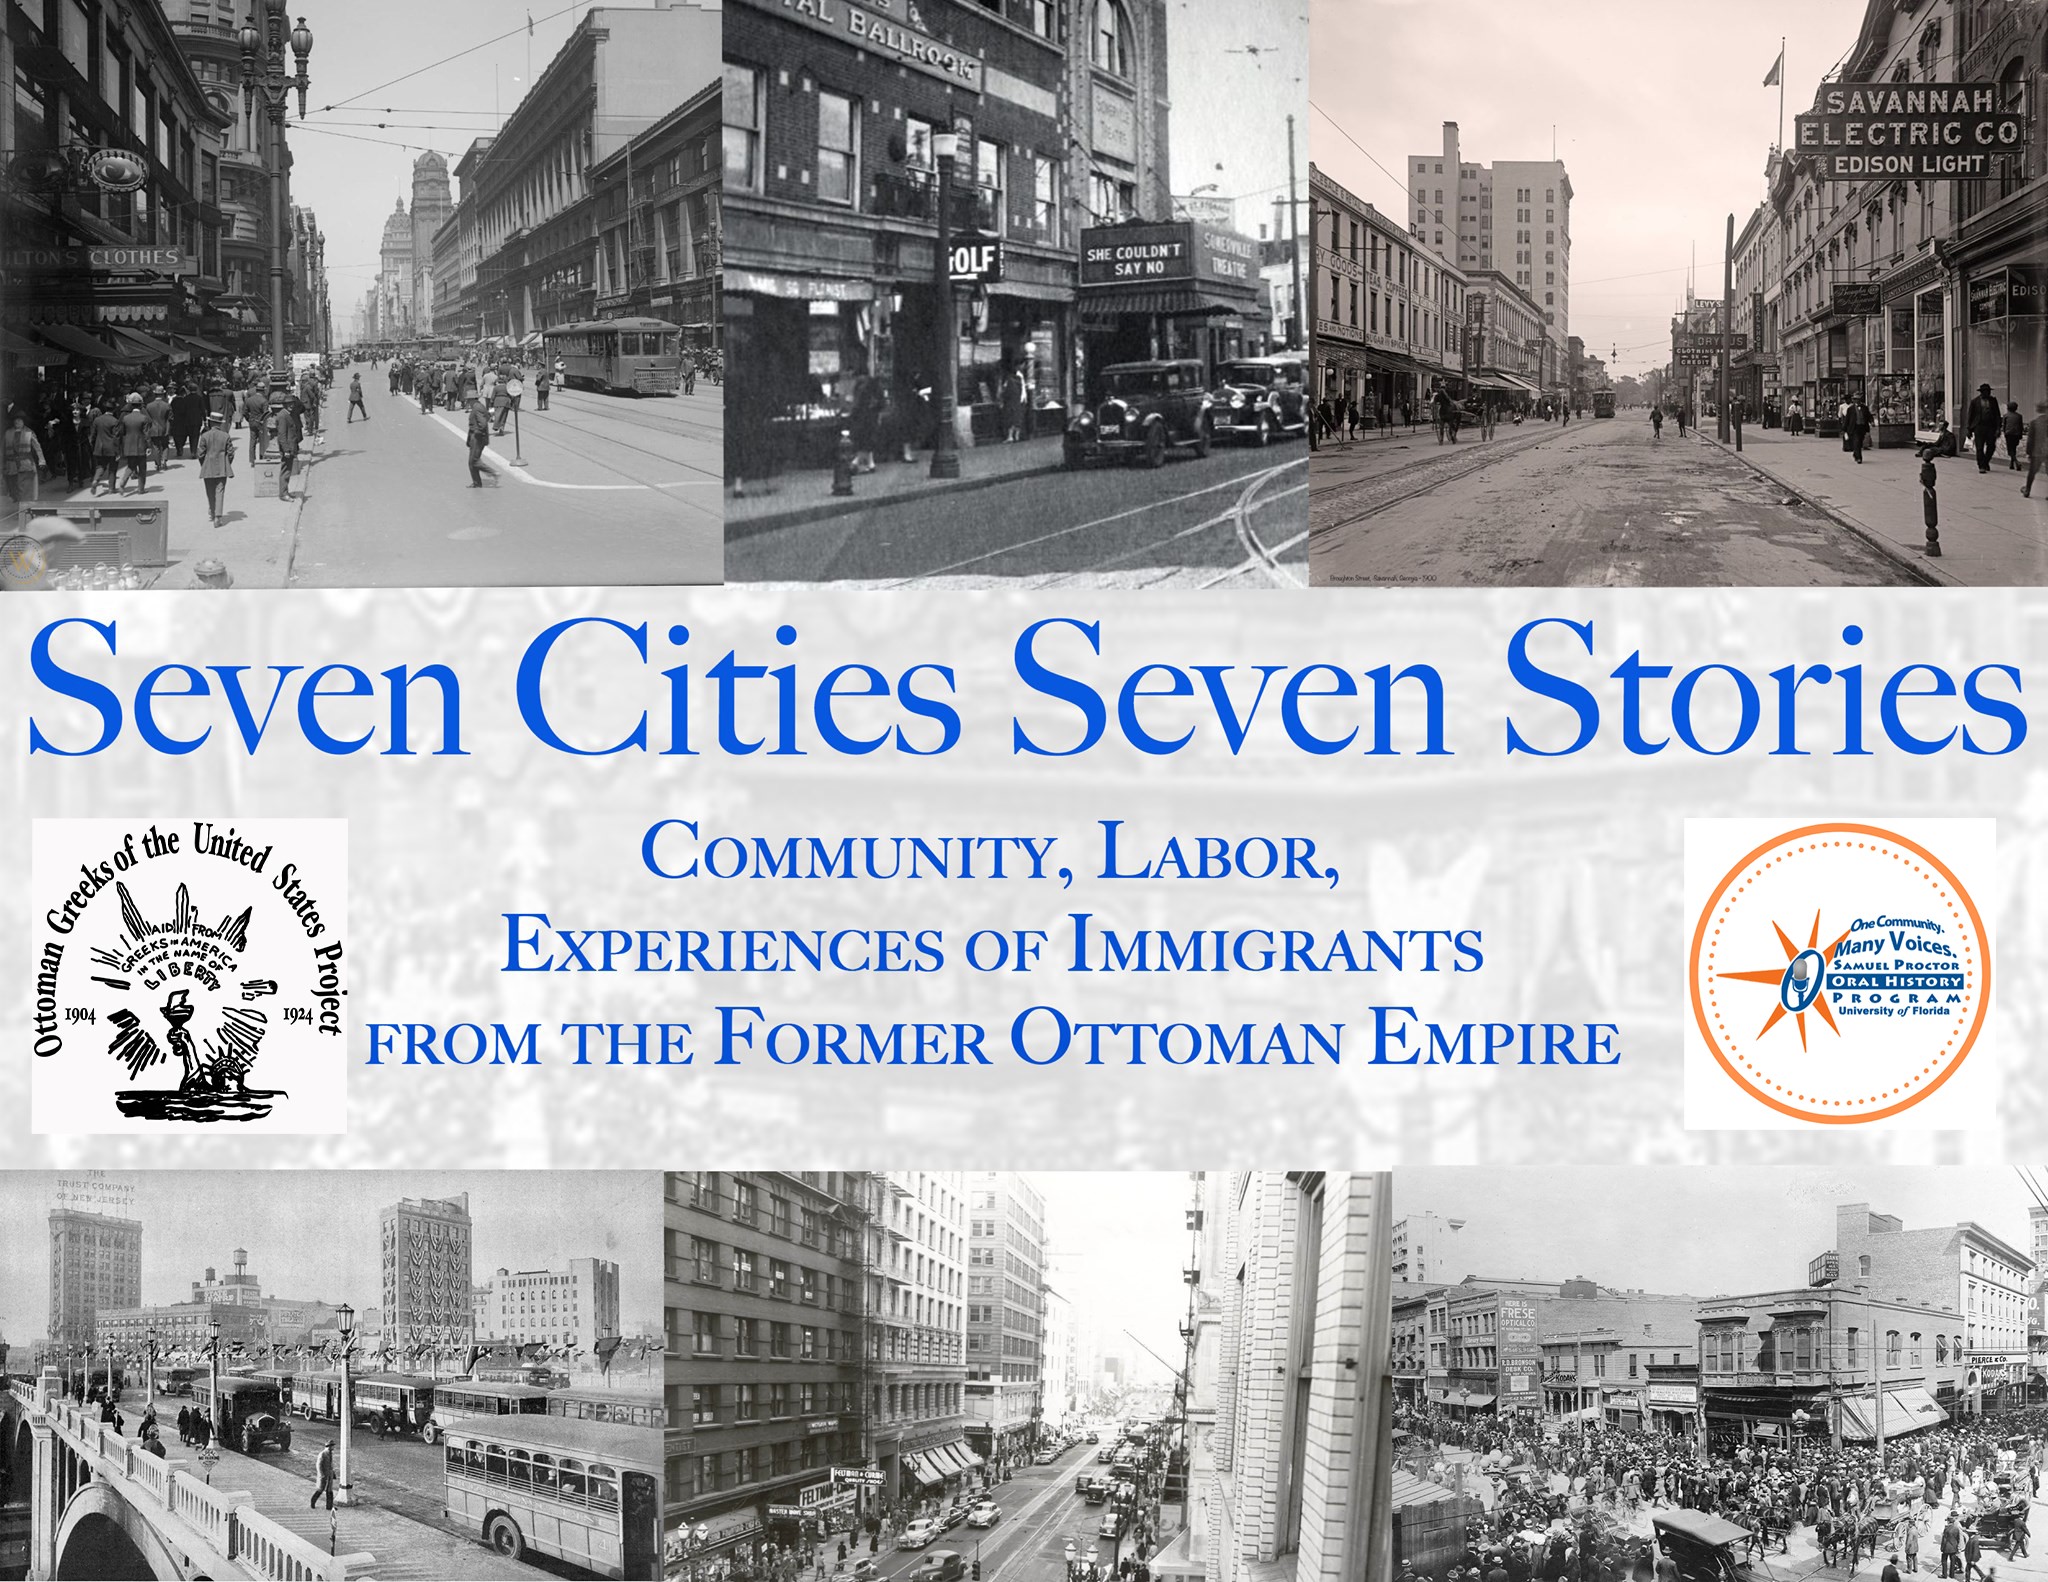 Seven Cities, Seven Stories: Community, Labor, Experience of Immigrants from the Former Ottoman Empire